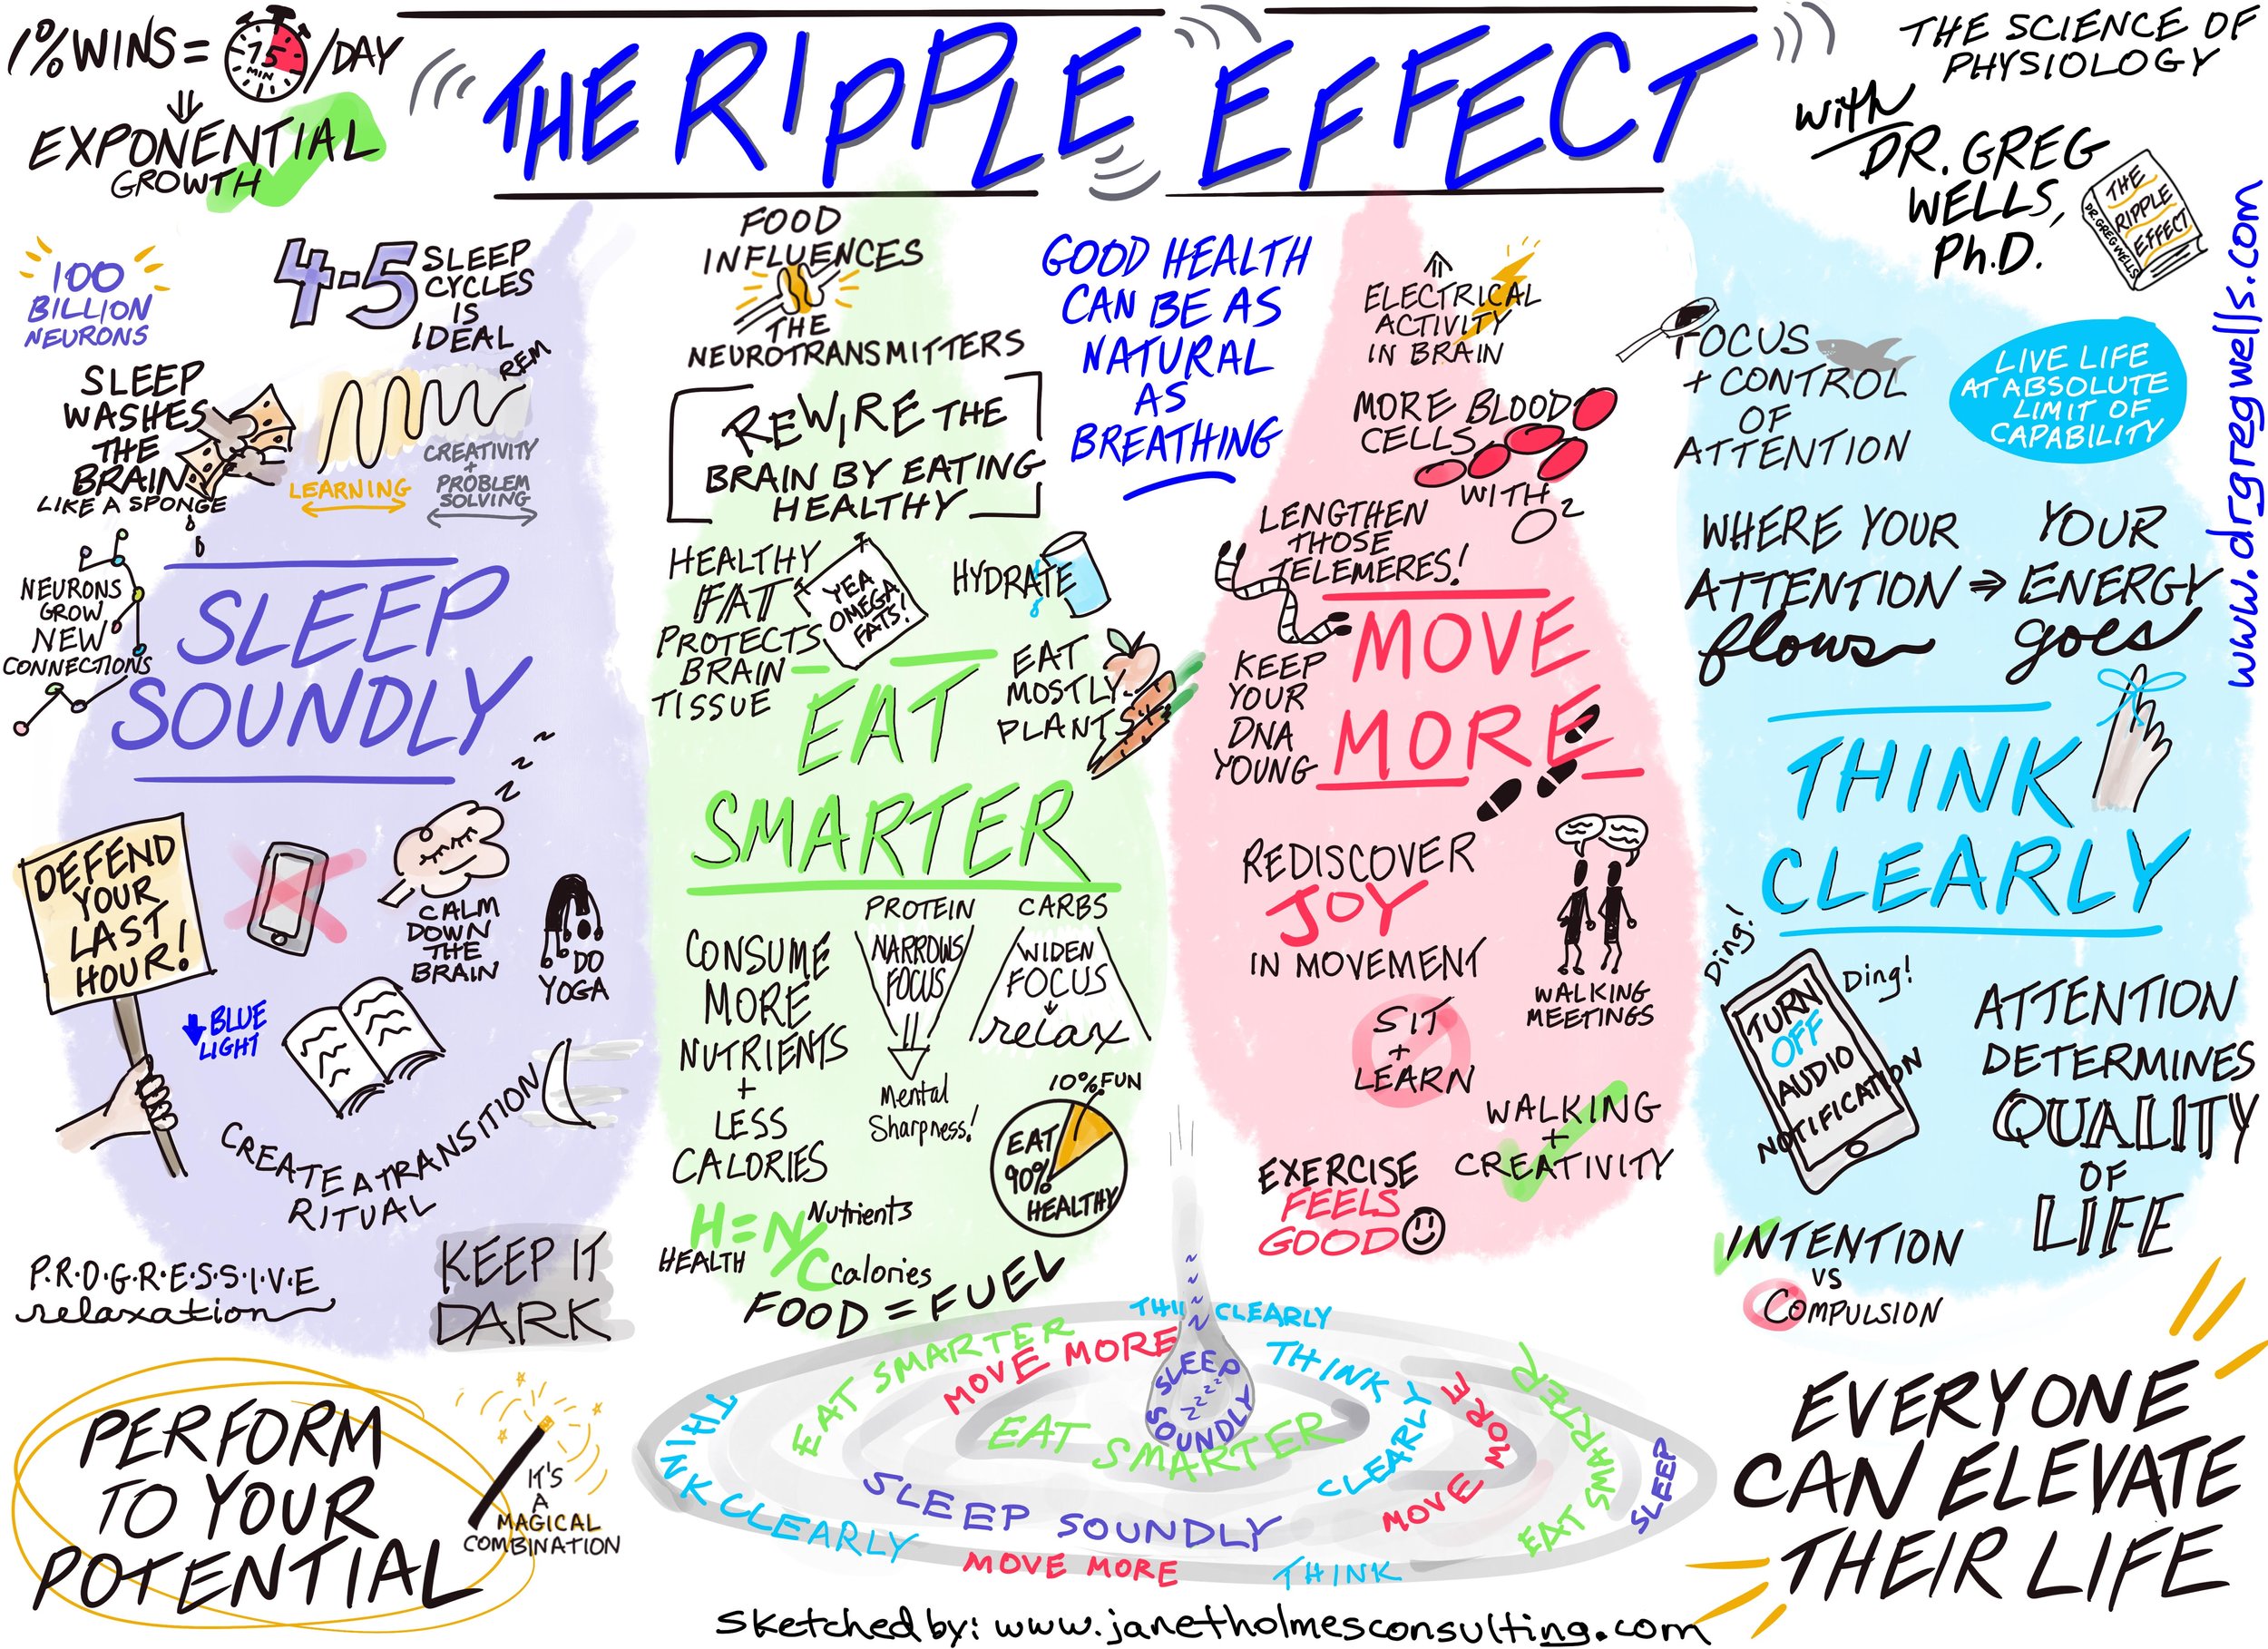 The Ripple Effect Keynote Resources — Dr. Greg Wells